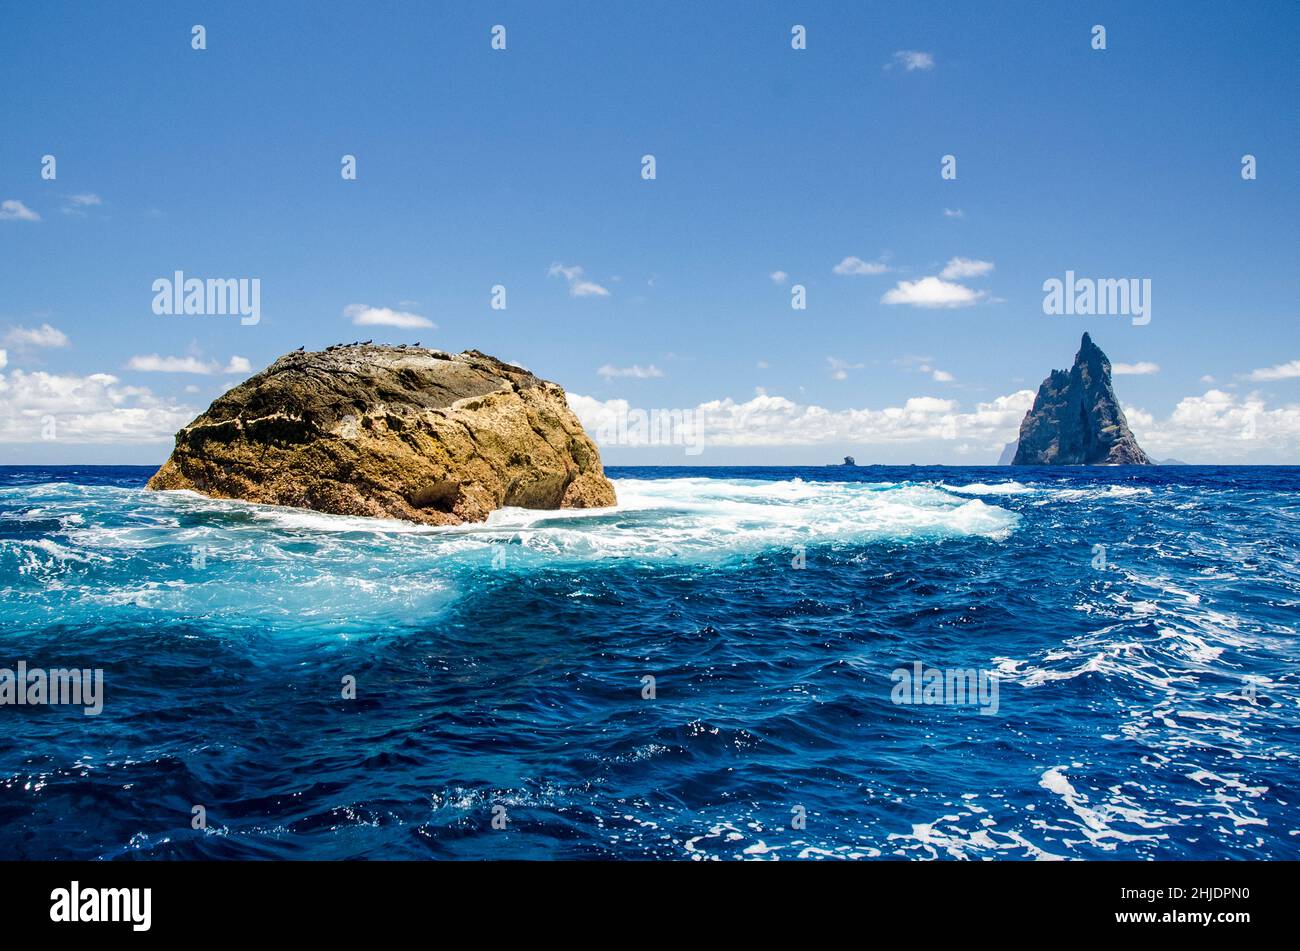 This exposed and infrequently-dived site is Southeast Pinnacle, with Ball's Pyramid in the distance. Lord Howe Island, Pacific Ocean, Australia, Tasma Stock Photo